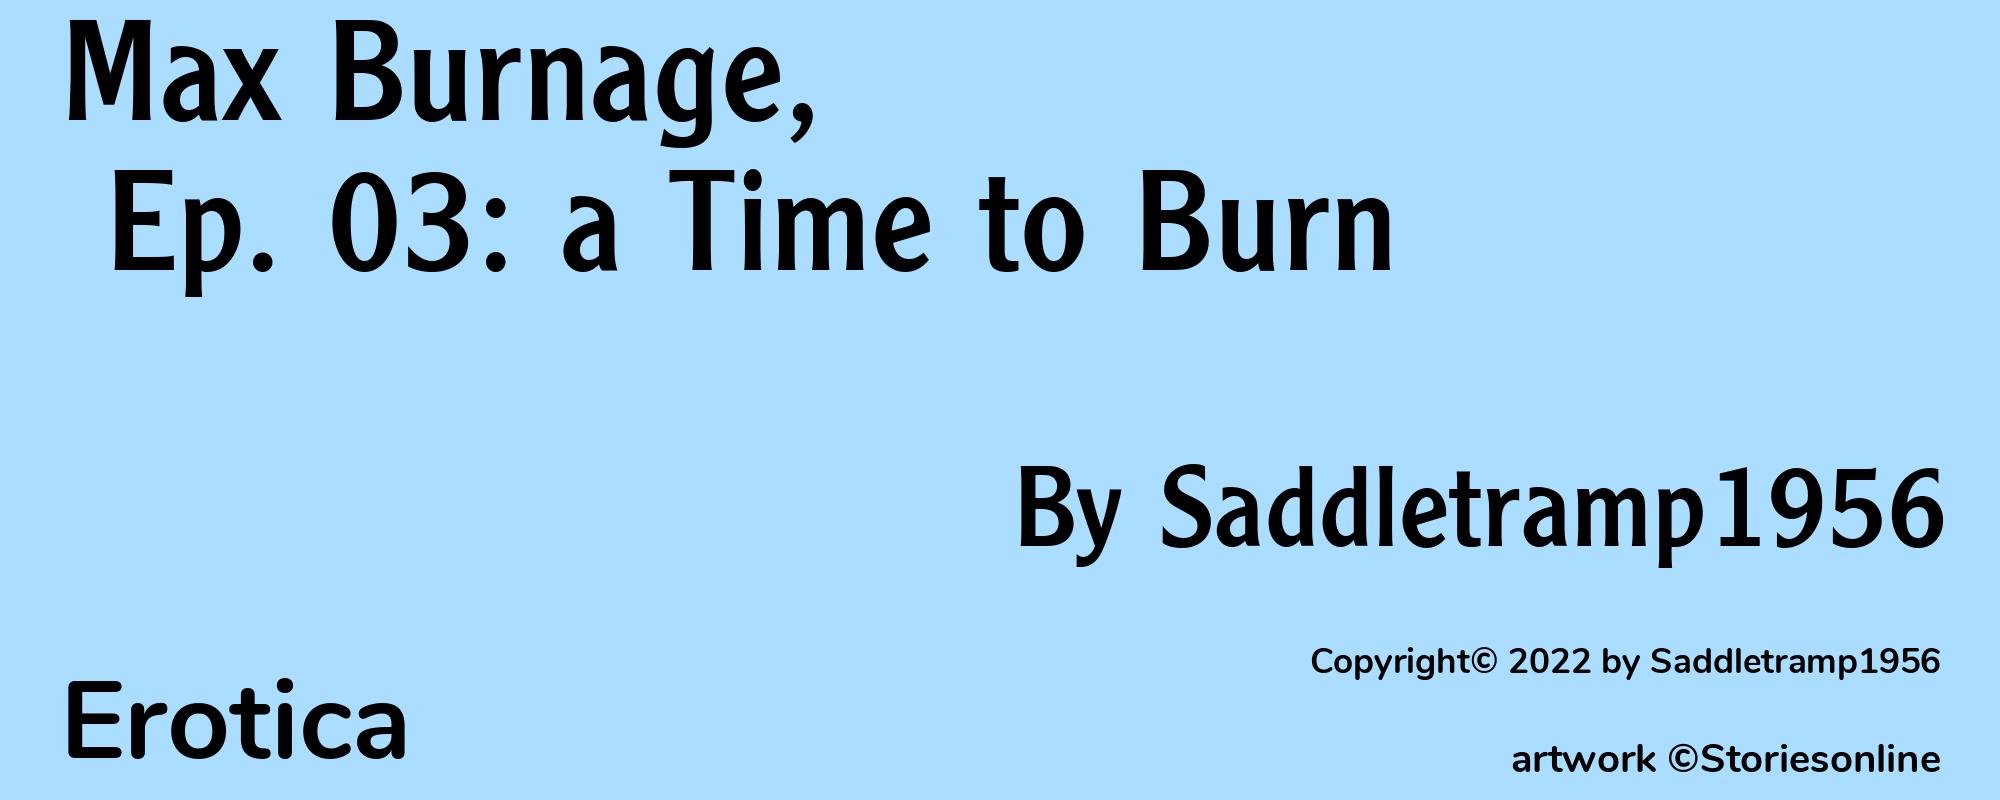 Max Burnage, Ep. 03: a Time to Burn - Cover